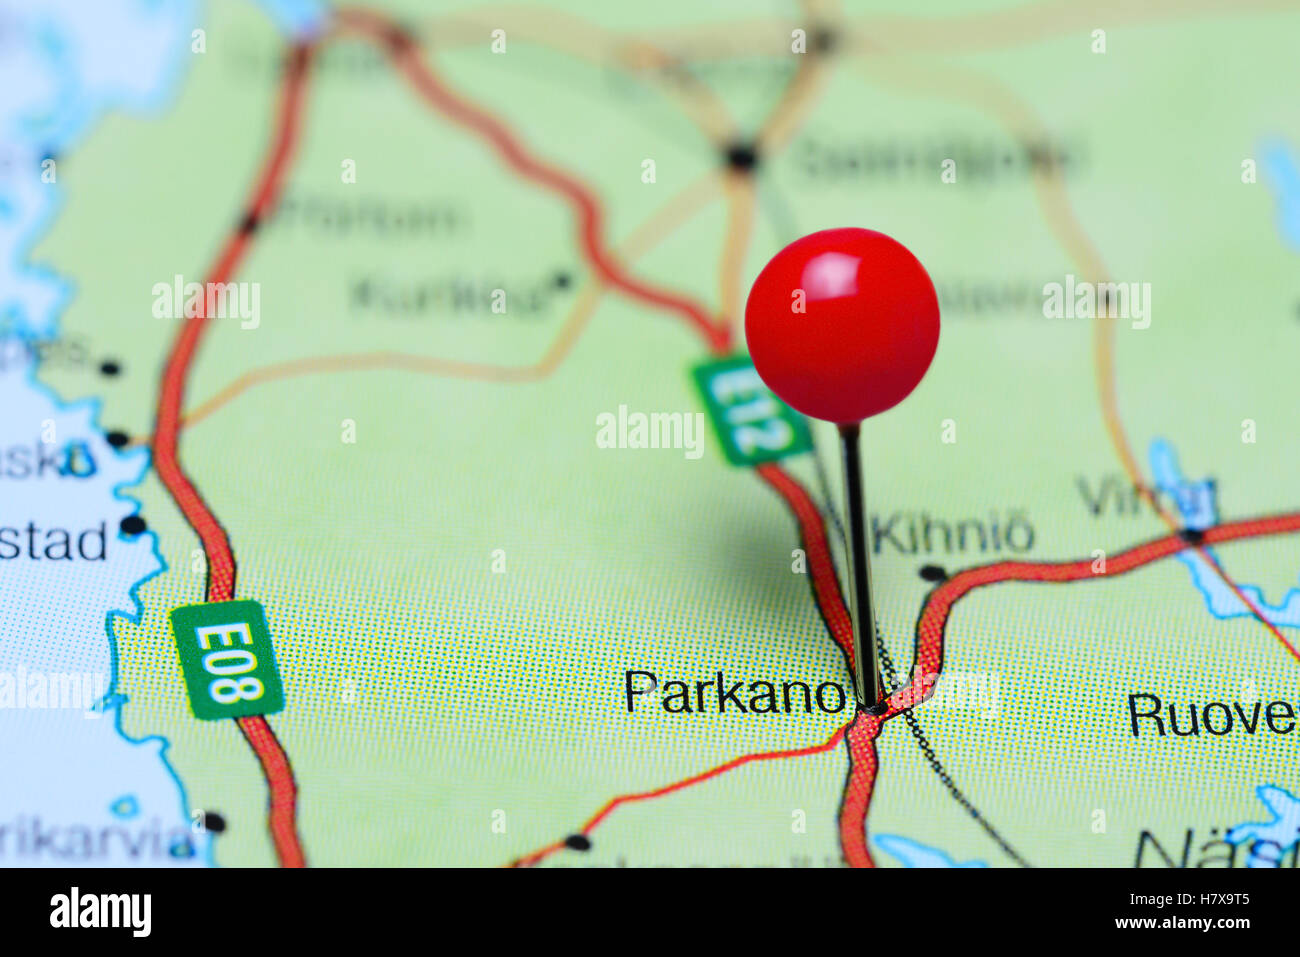 Parkano pinned on a map of Finland Stock Photo